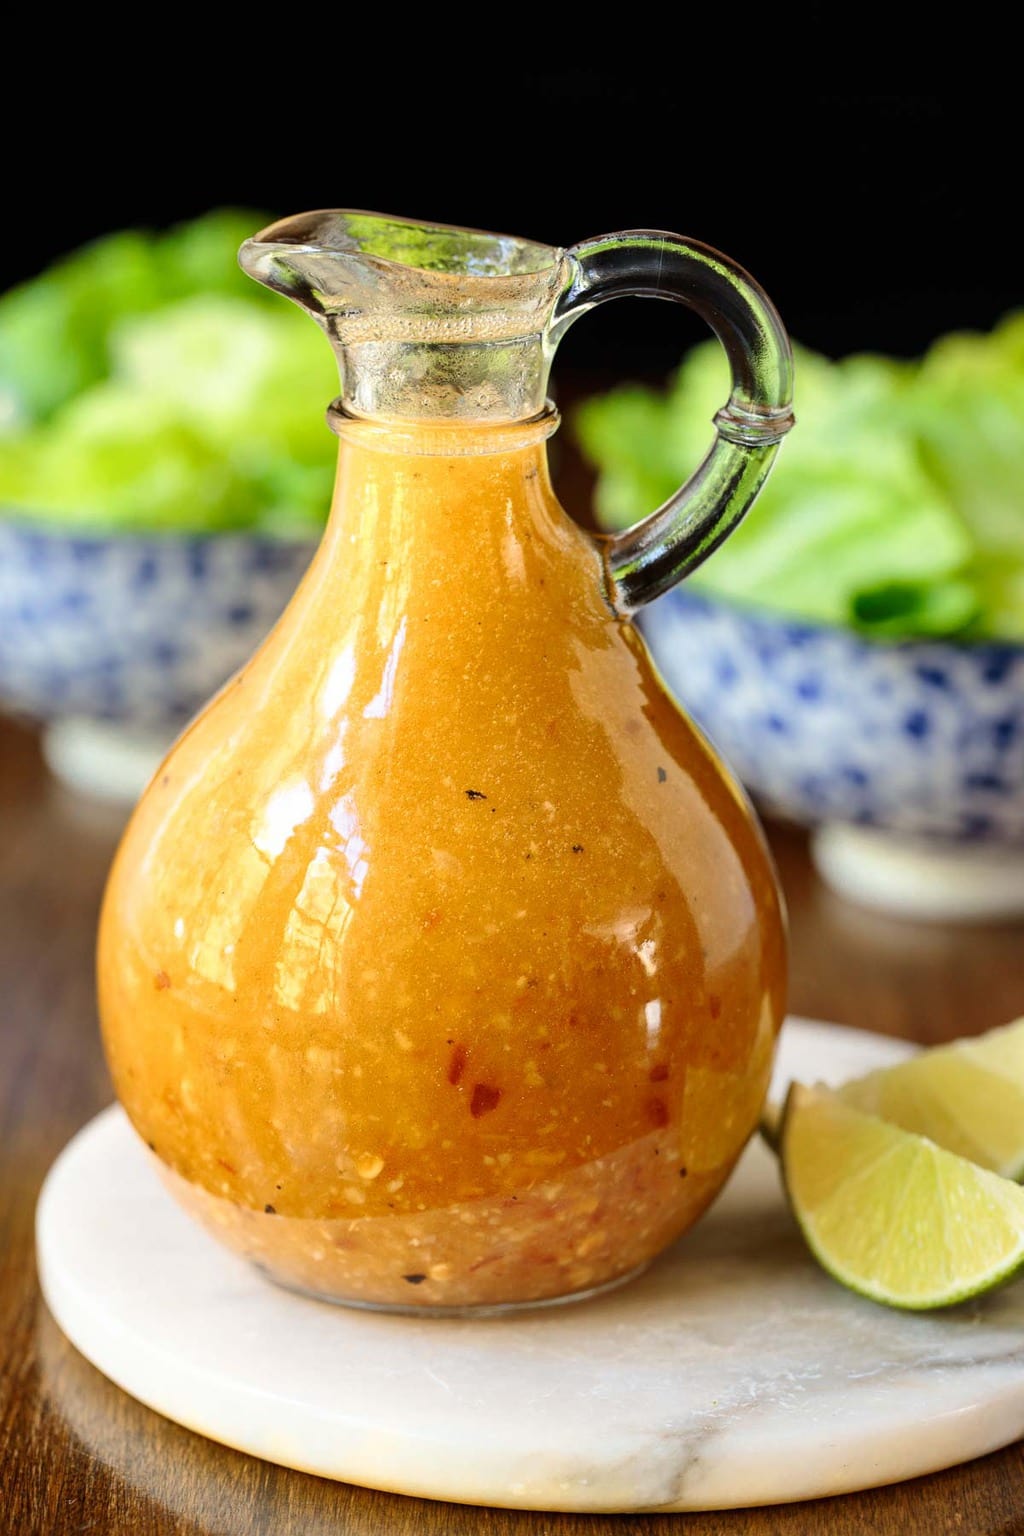 Vertical closeup photo of Chili Lime Salad Dressing in a glass cruet with two bowls of fresh lettuce in the background.